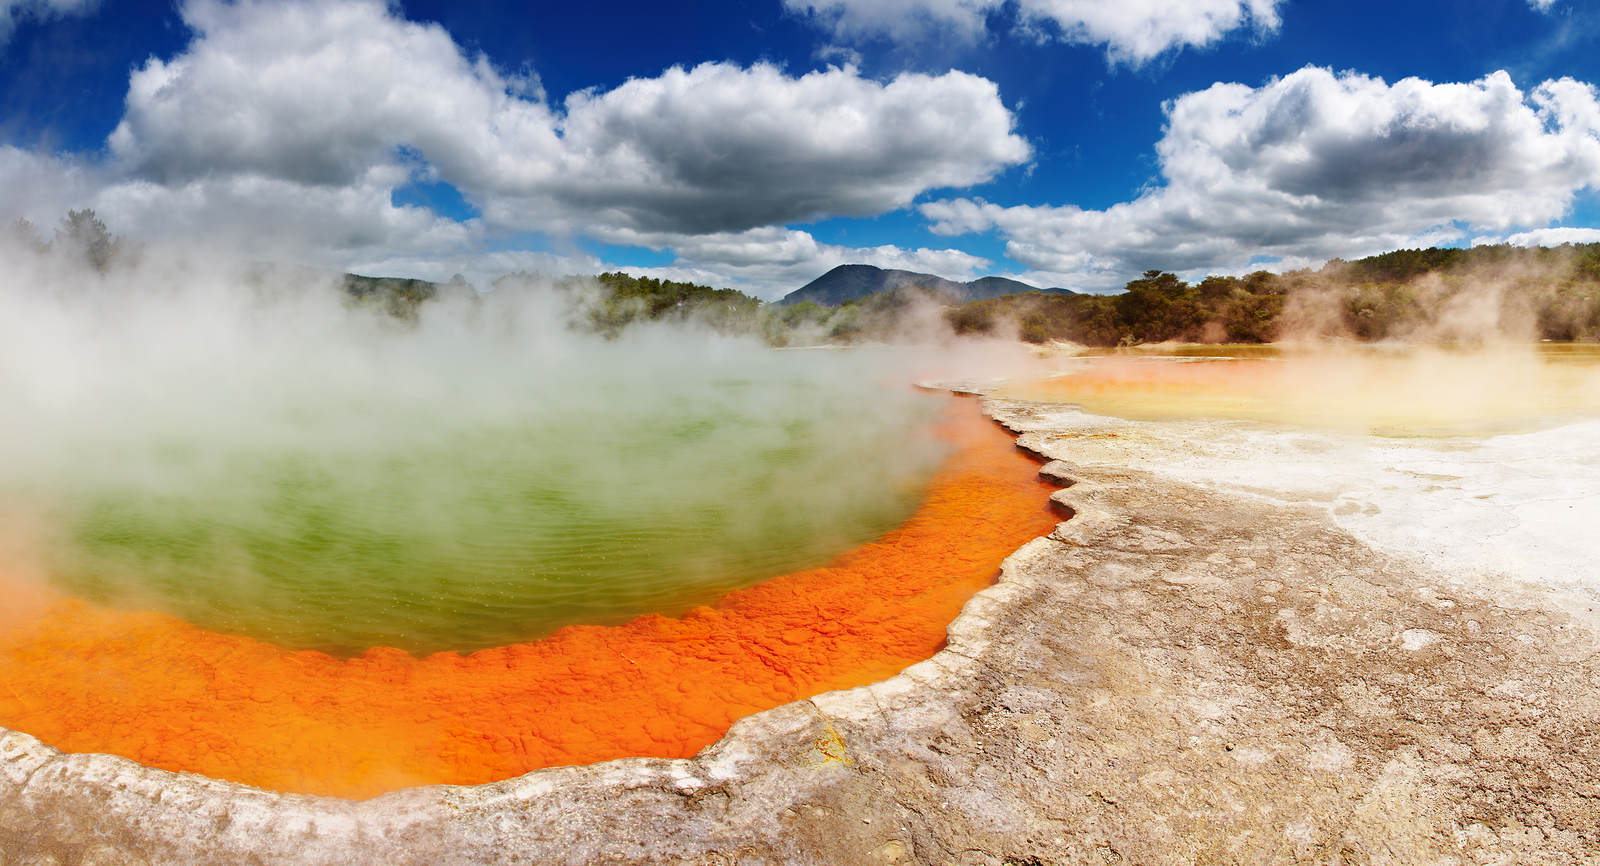 Discover the natural wonders of Wai-o-Tapu or Waimangu by convenient shuttle service!